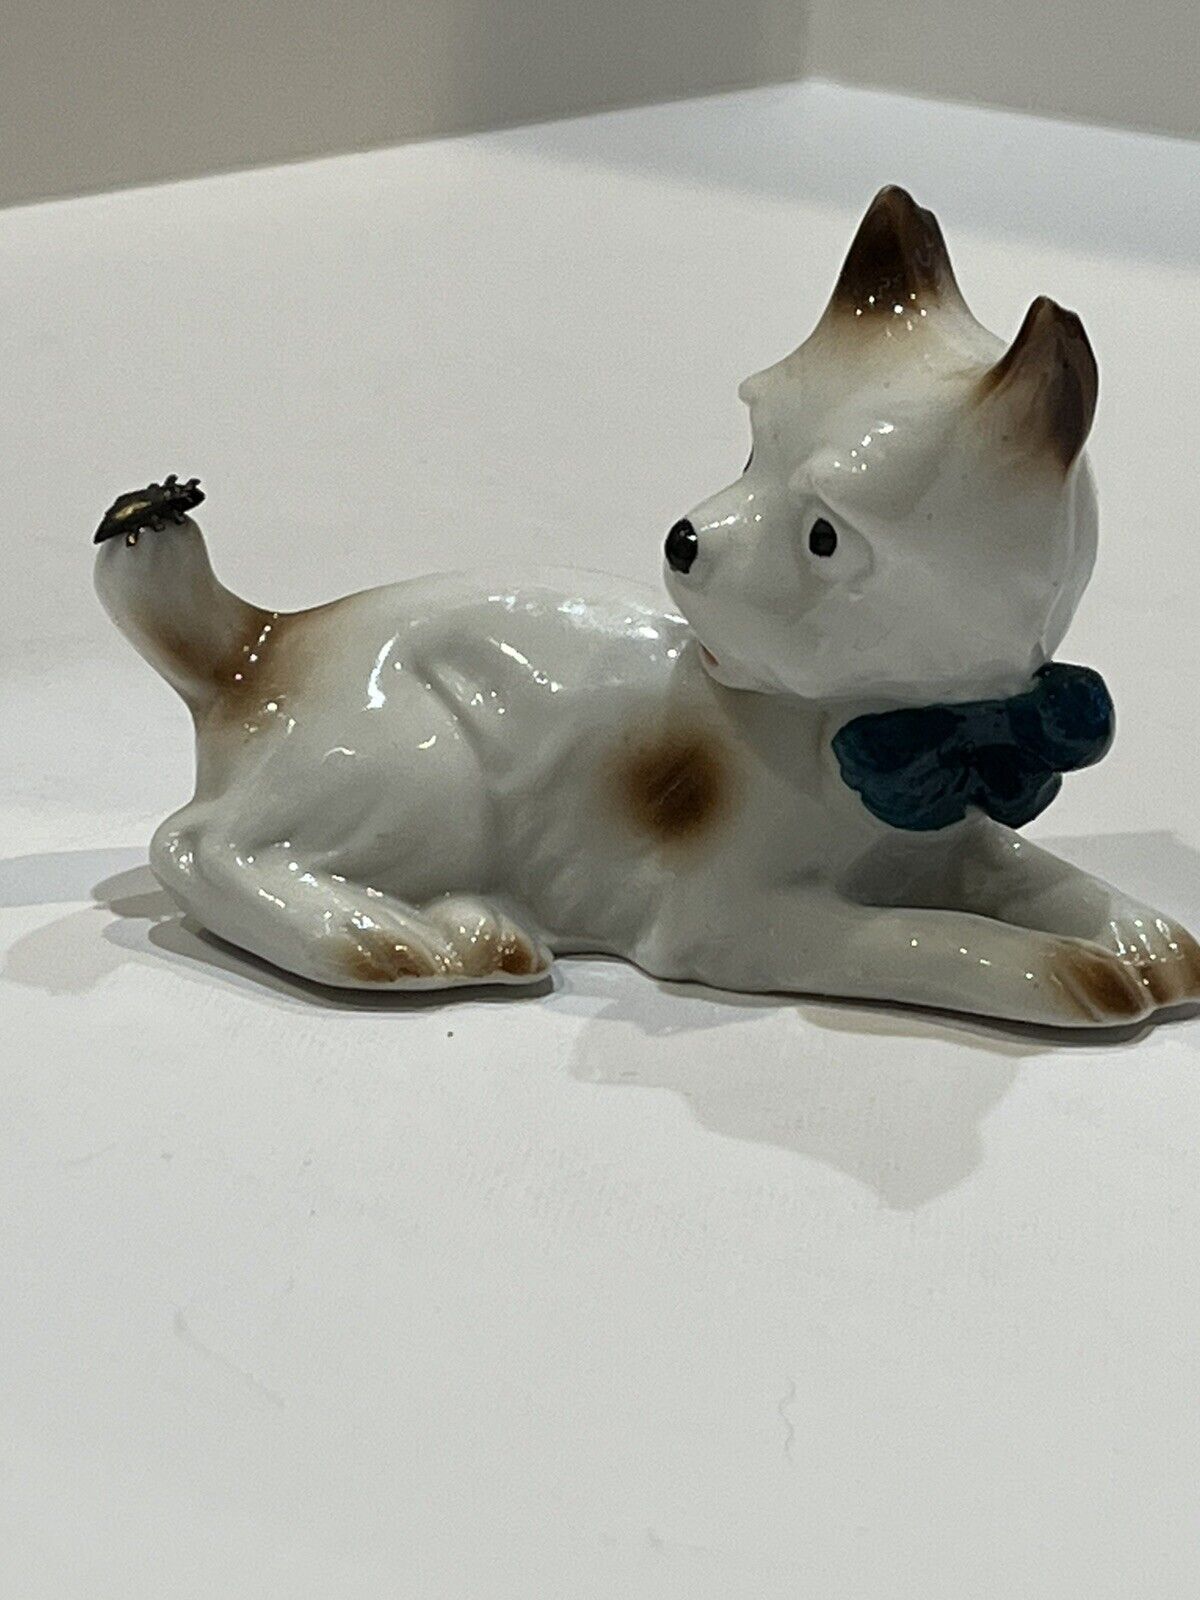 Antq/Vtg Porcelain BONZO Dog Figurine With Brass Fly On Tail Germany 1920’s